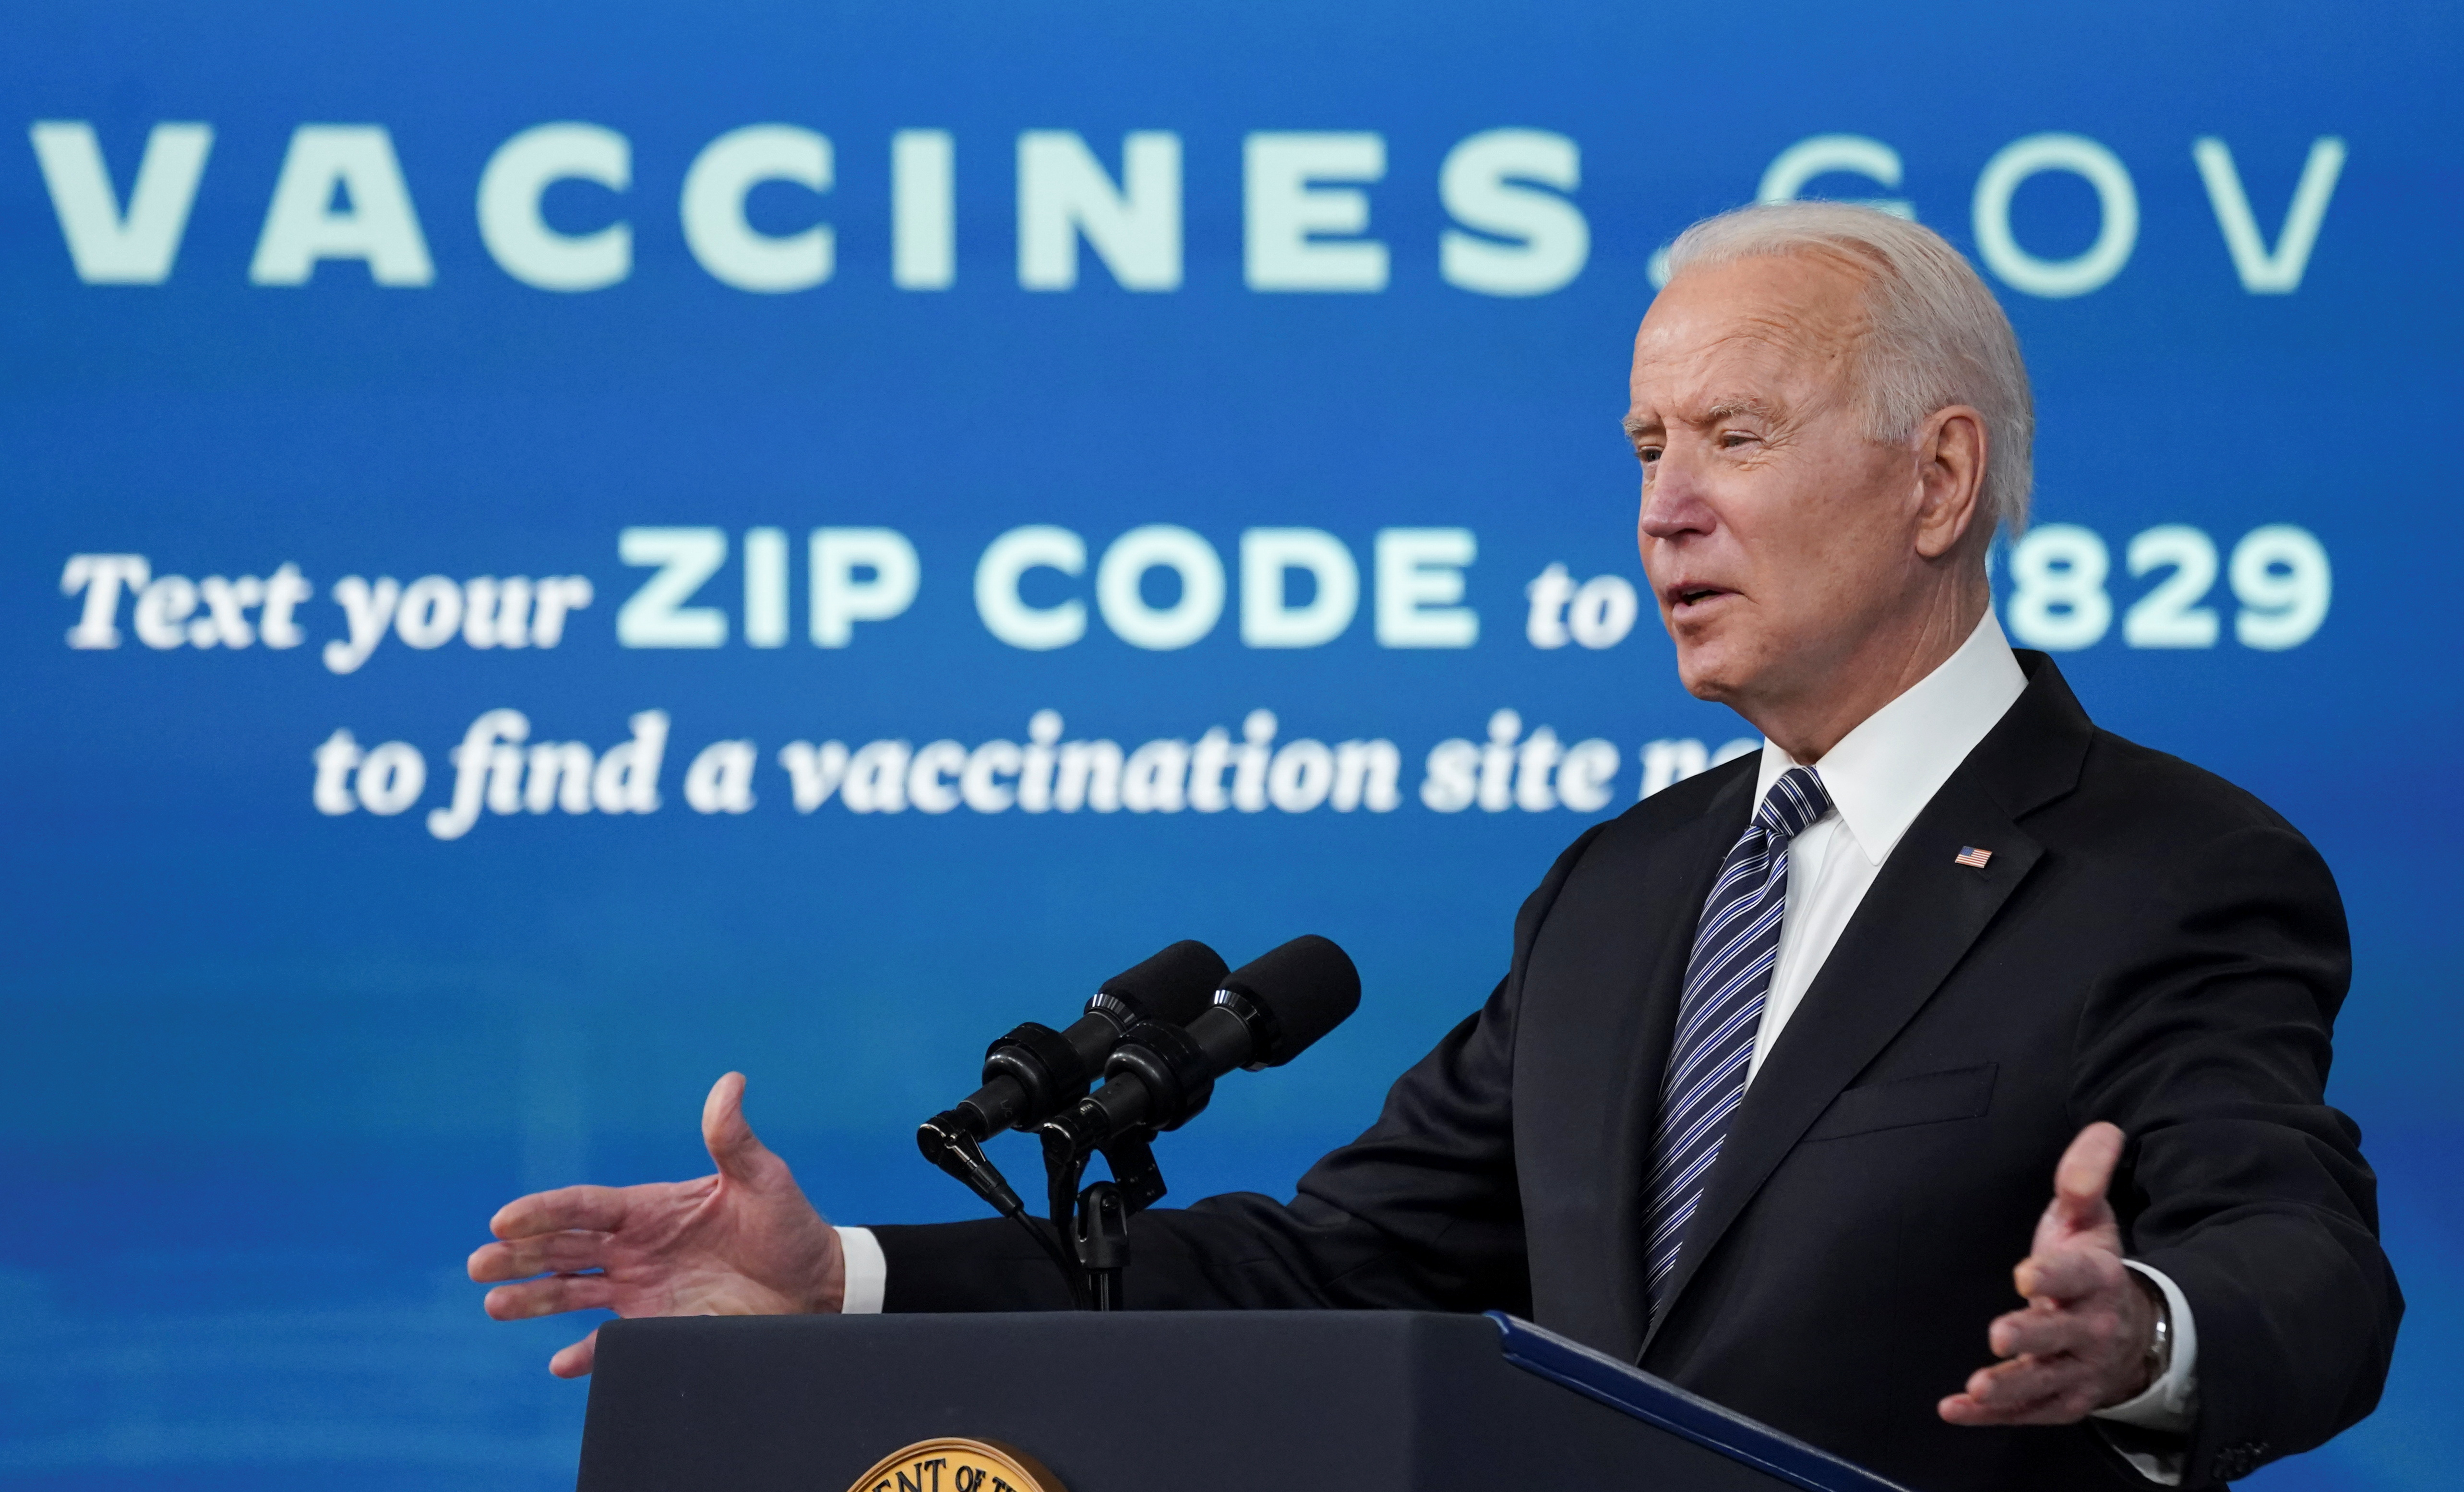 Biden speaks about the COVID-19 response at the White House in Washington